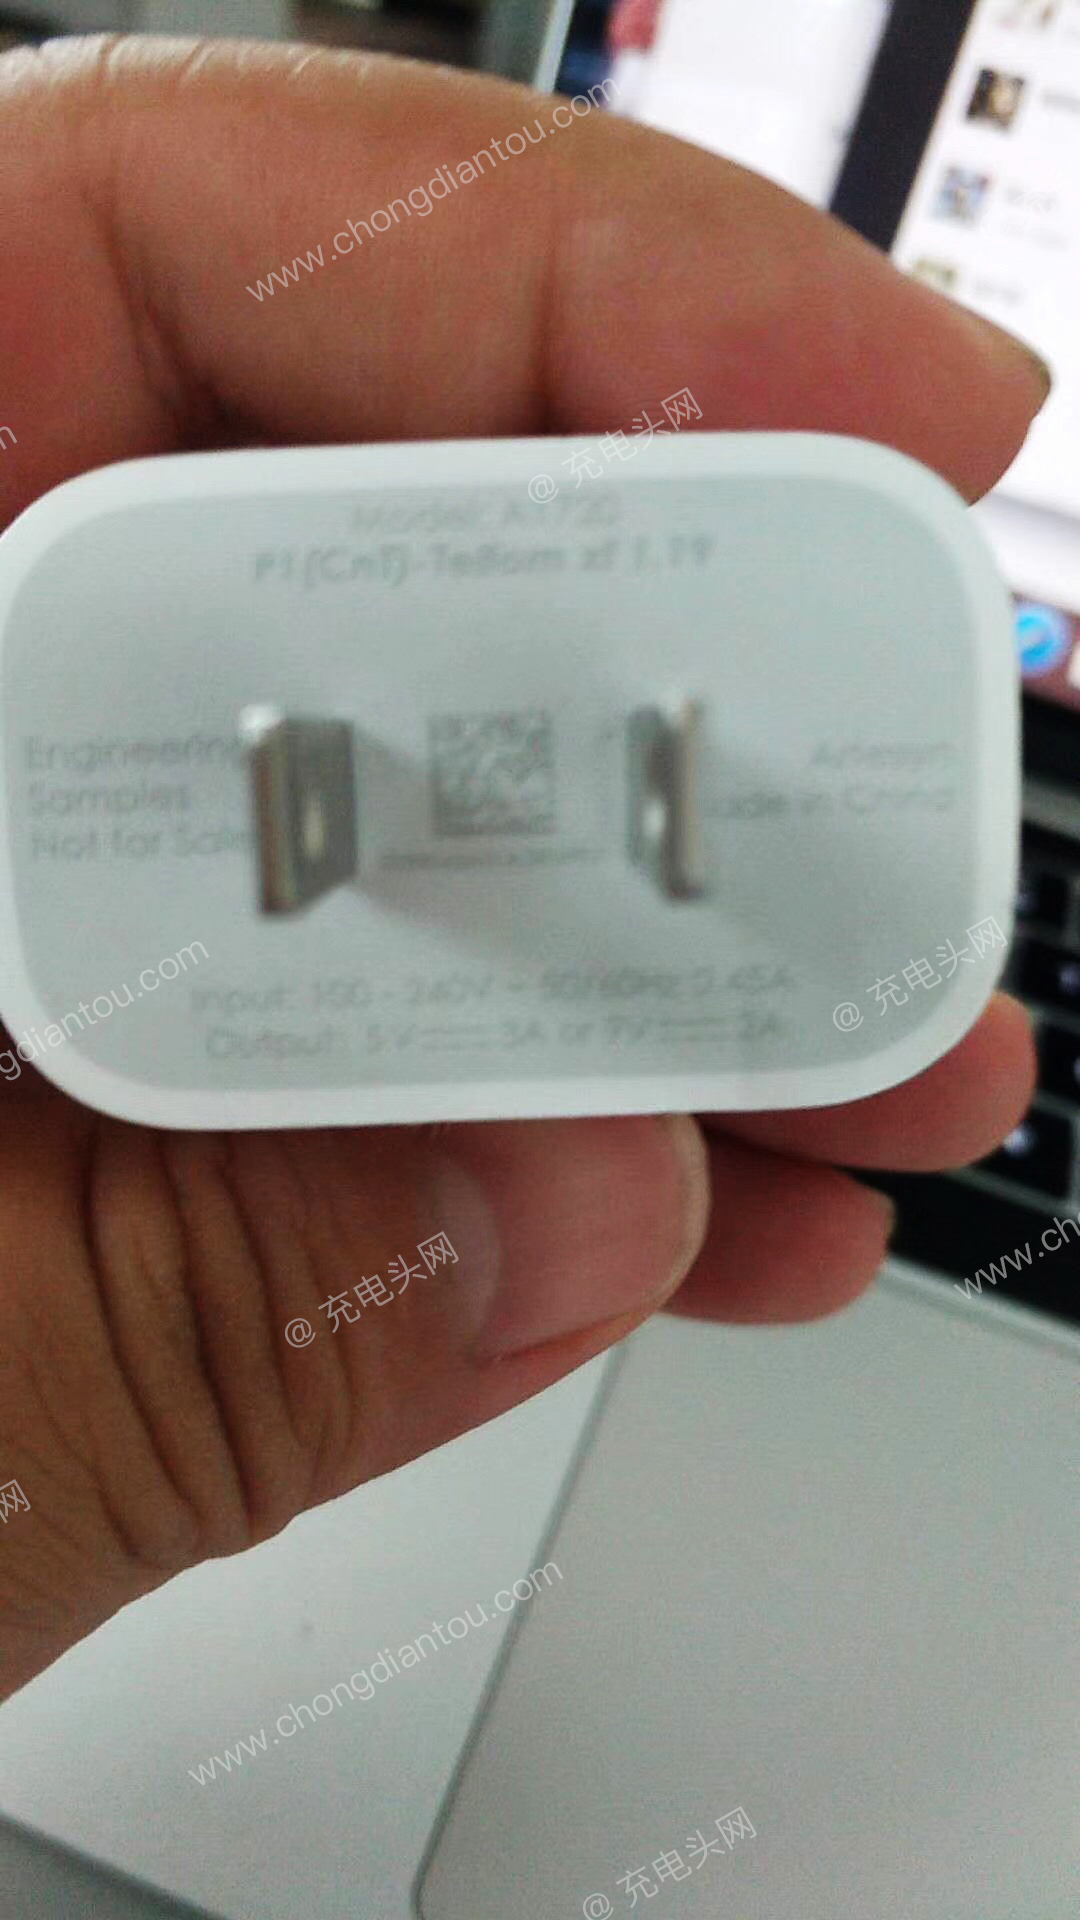 Leaked Photos of New Apple 18W USB-C iPhone Charger?